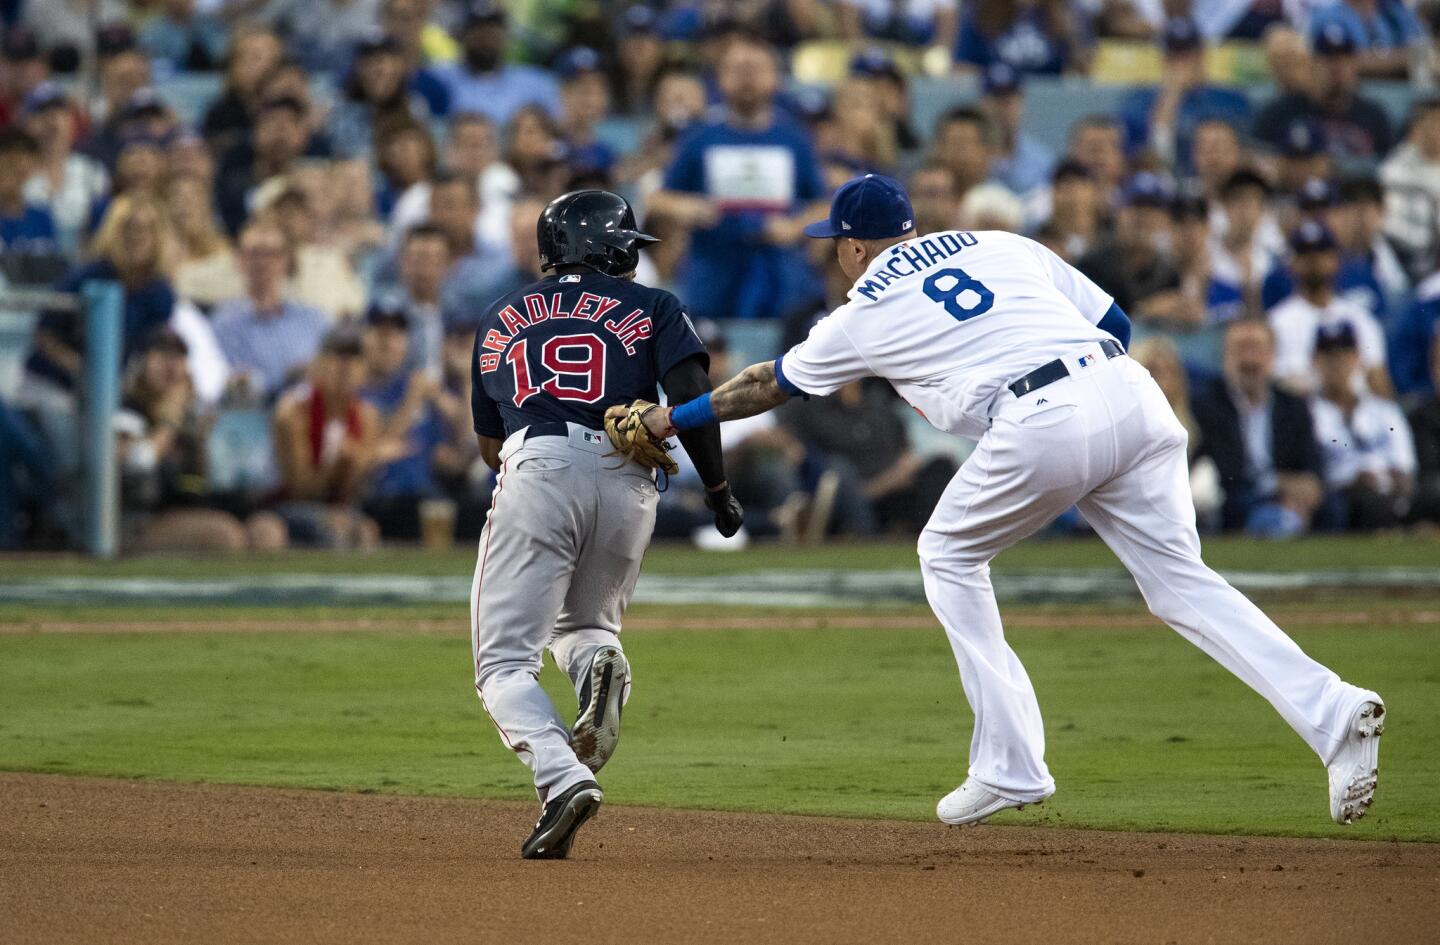 Dodgers shortstop Manny Machado tags out Red Sox center fielder Jackie Bradley Jr. who was attempting to steal in the third inning.